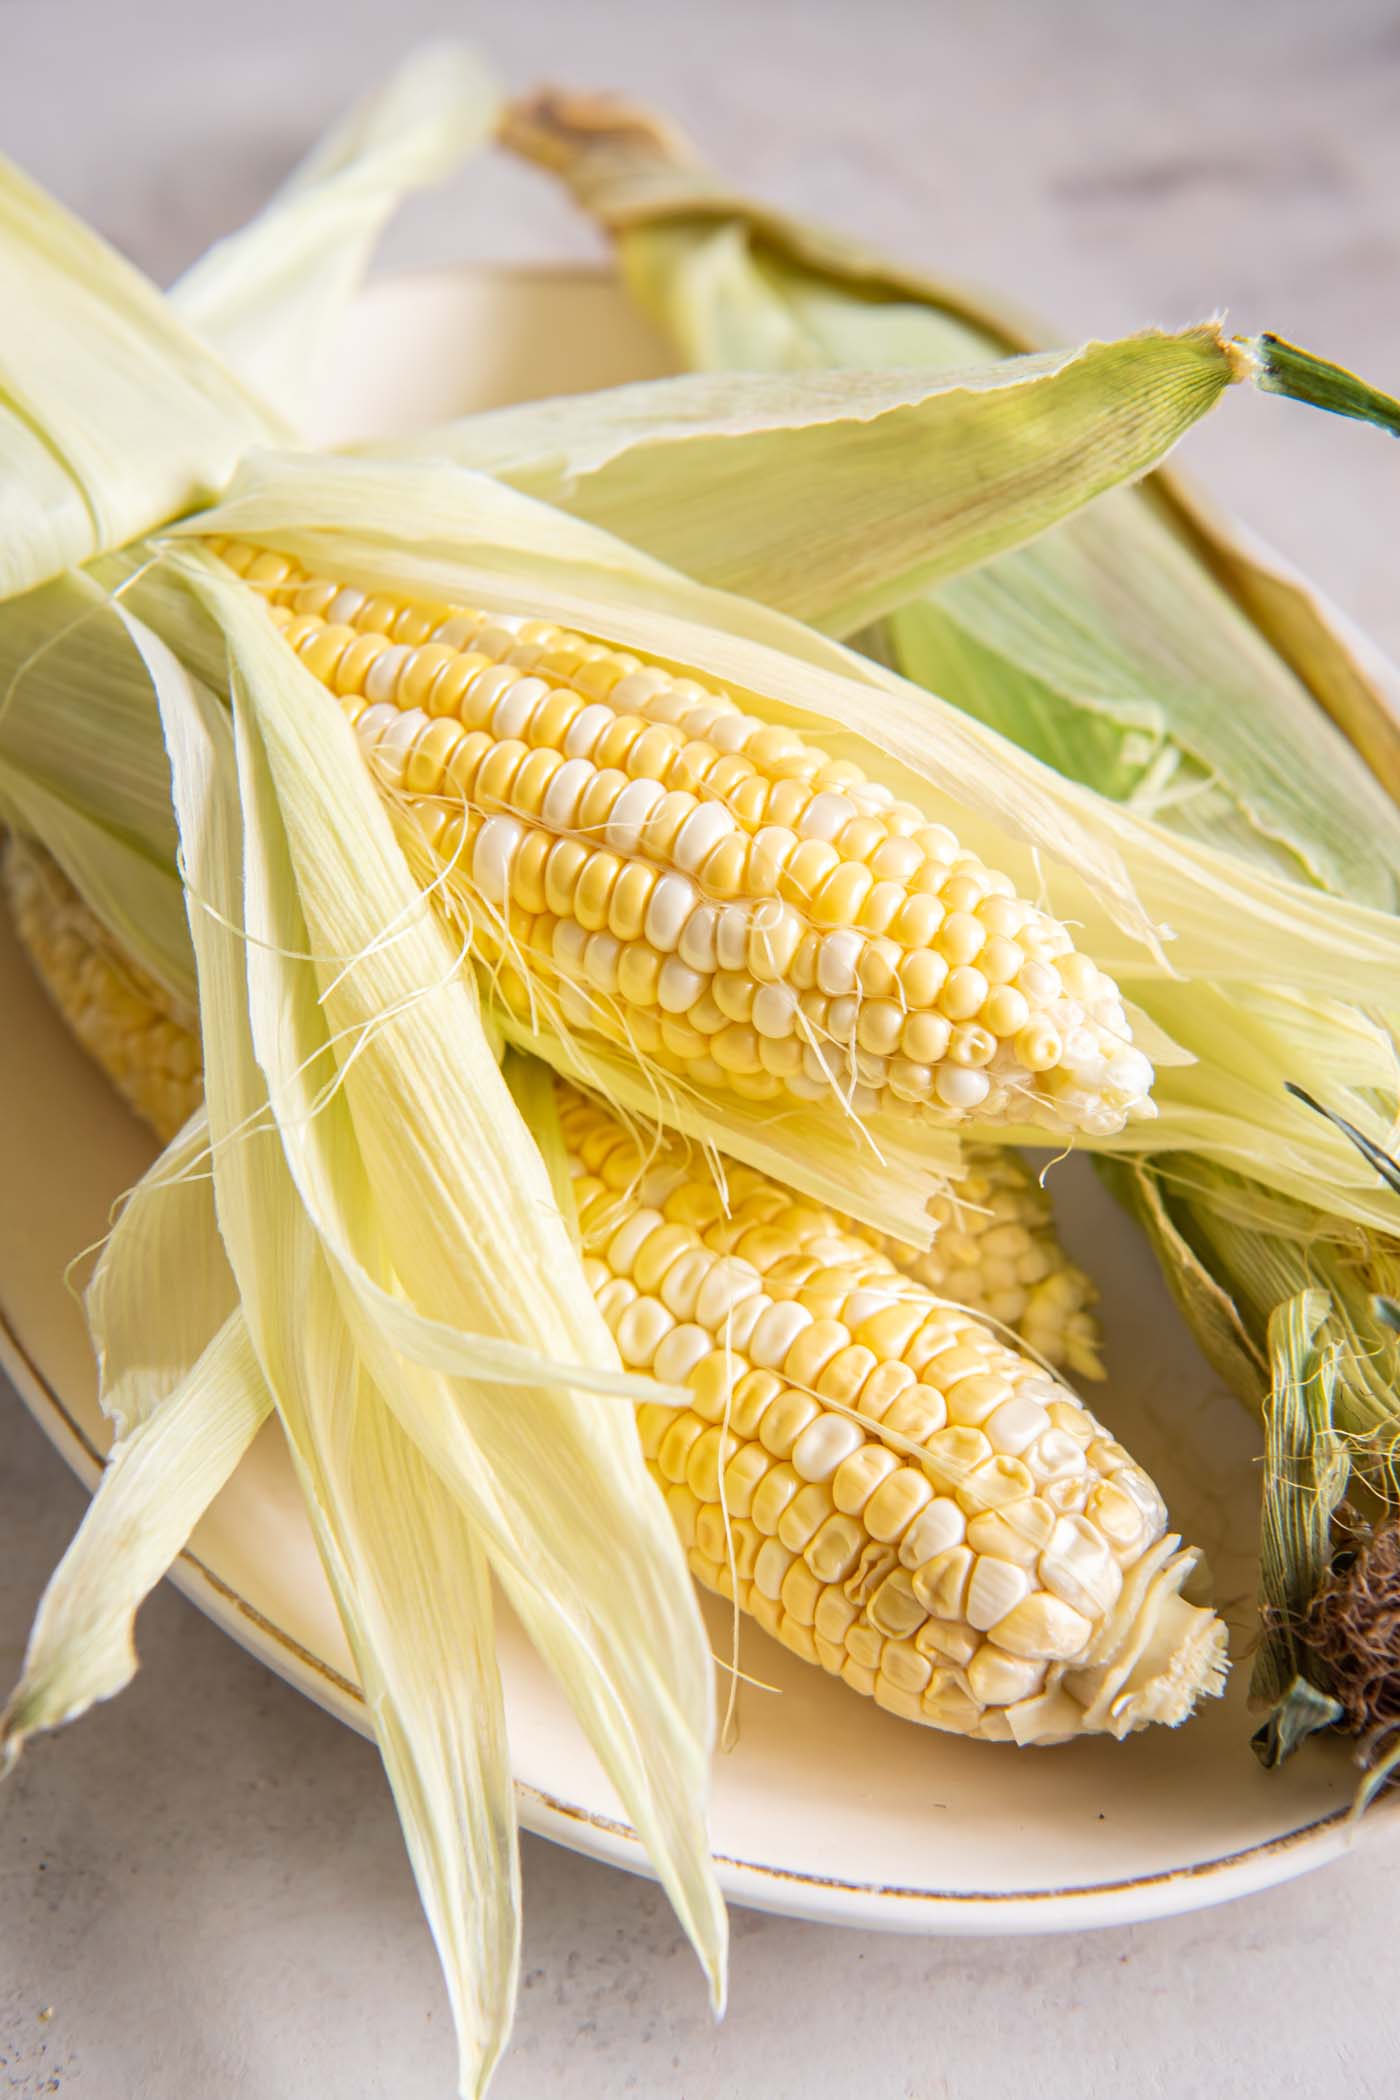 Partially shucked corn cobs on a plate.